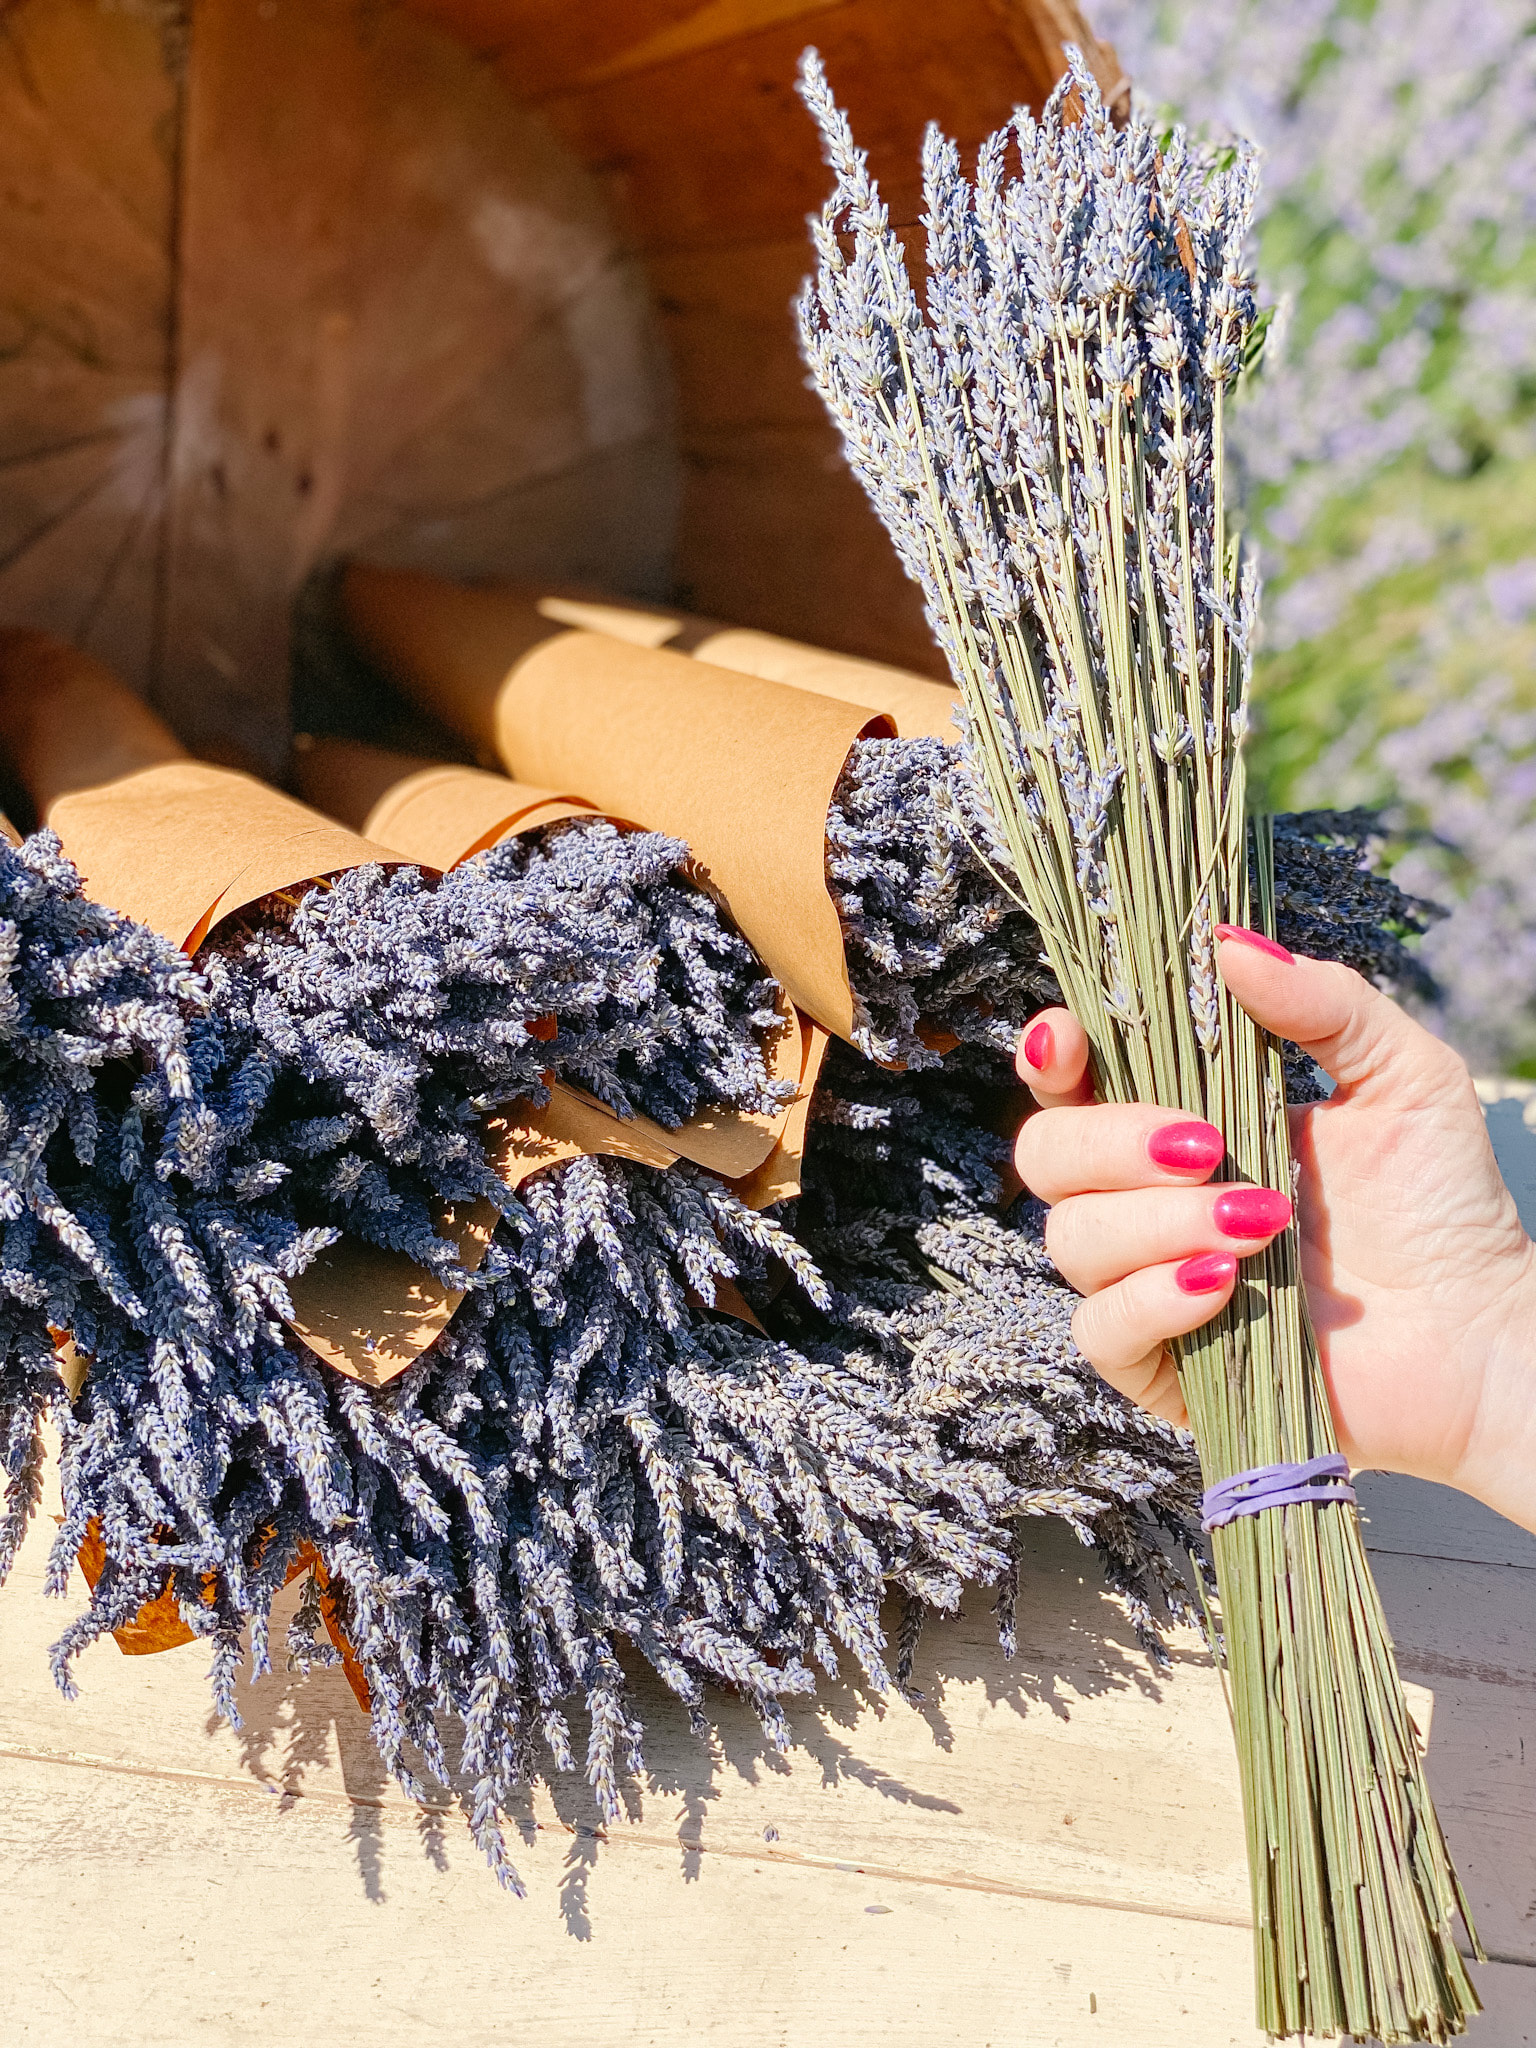 Dried French Lavender Bunch, Dried Grosso Lavendar bunches & stems